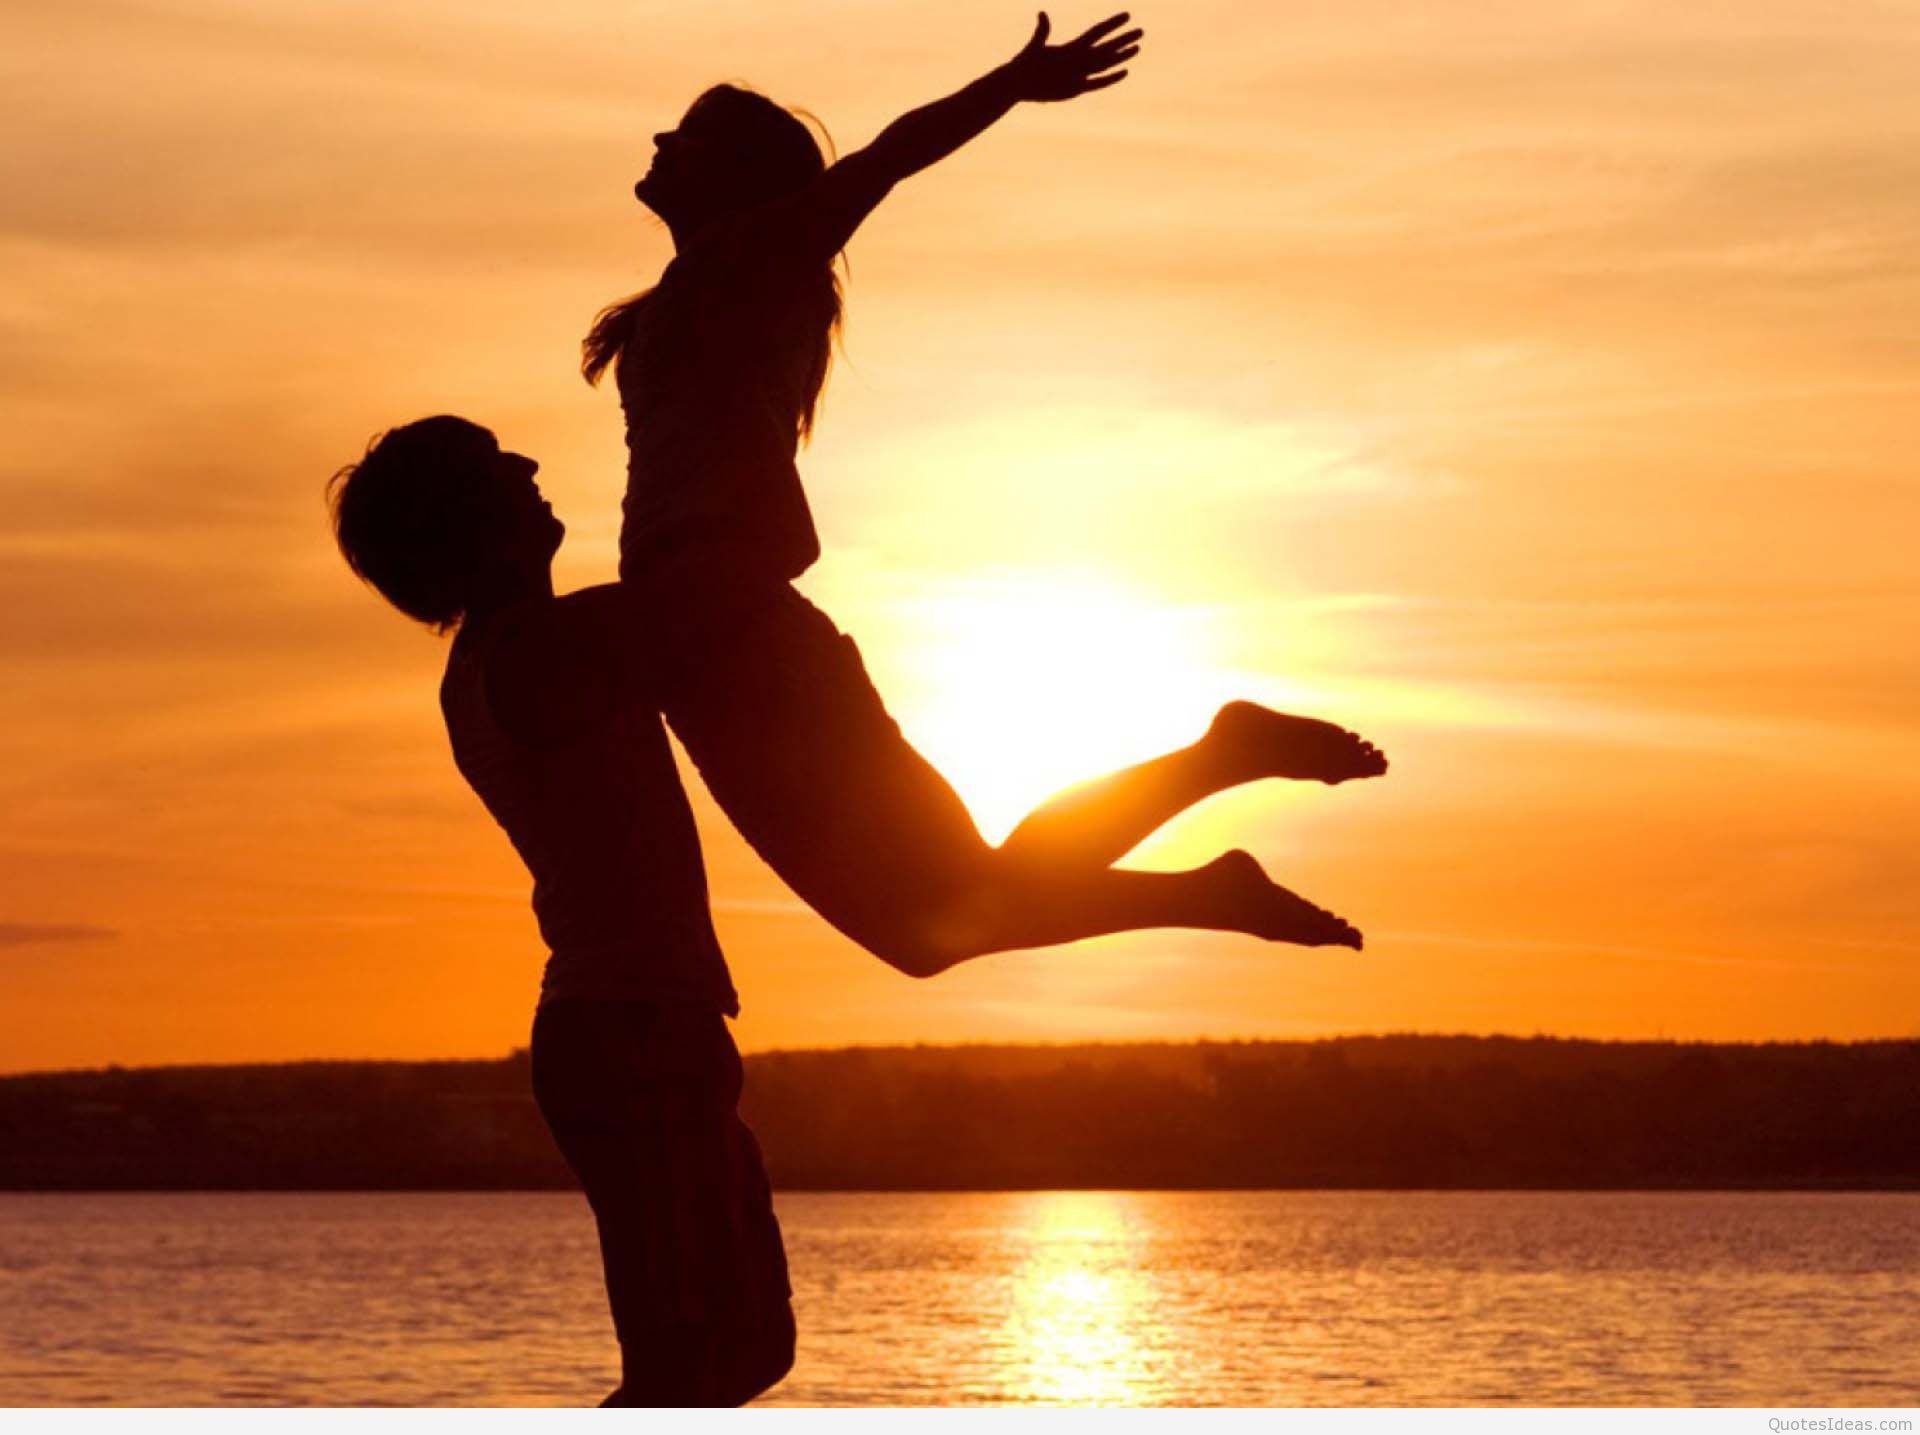 happy wallpapers of love,people in nature,happy,sky,friendship,fun